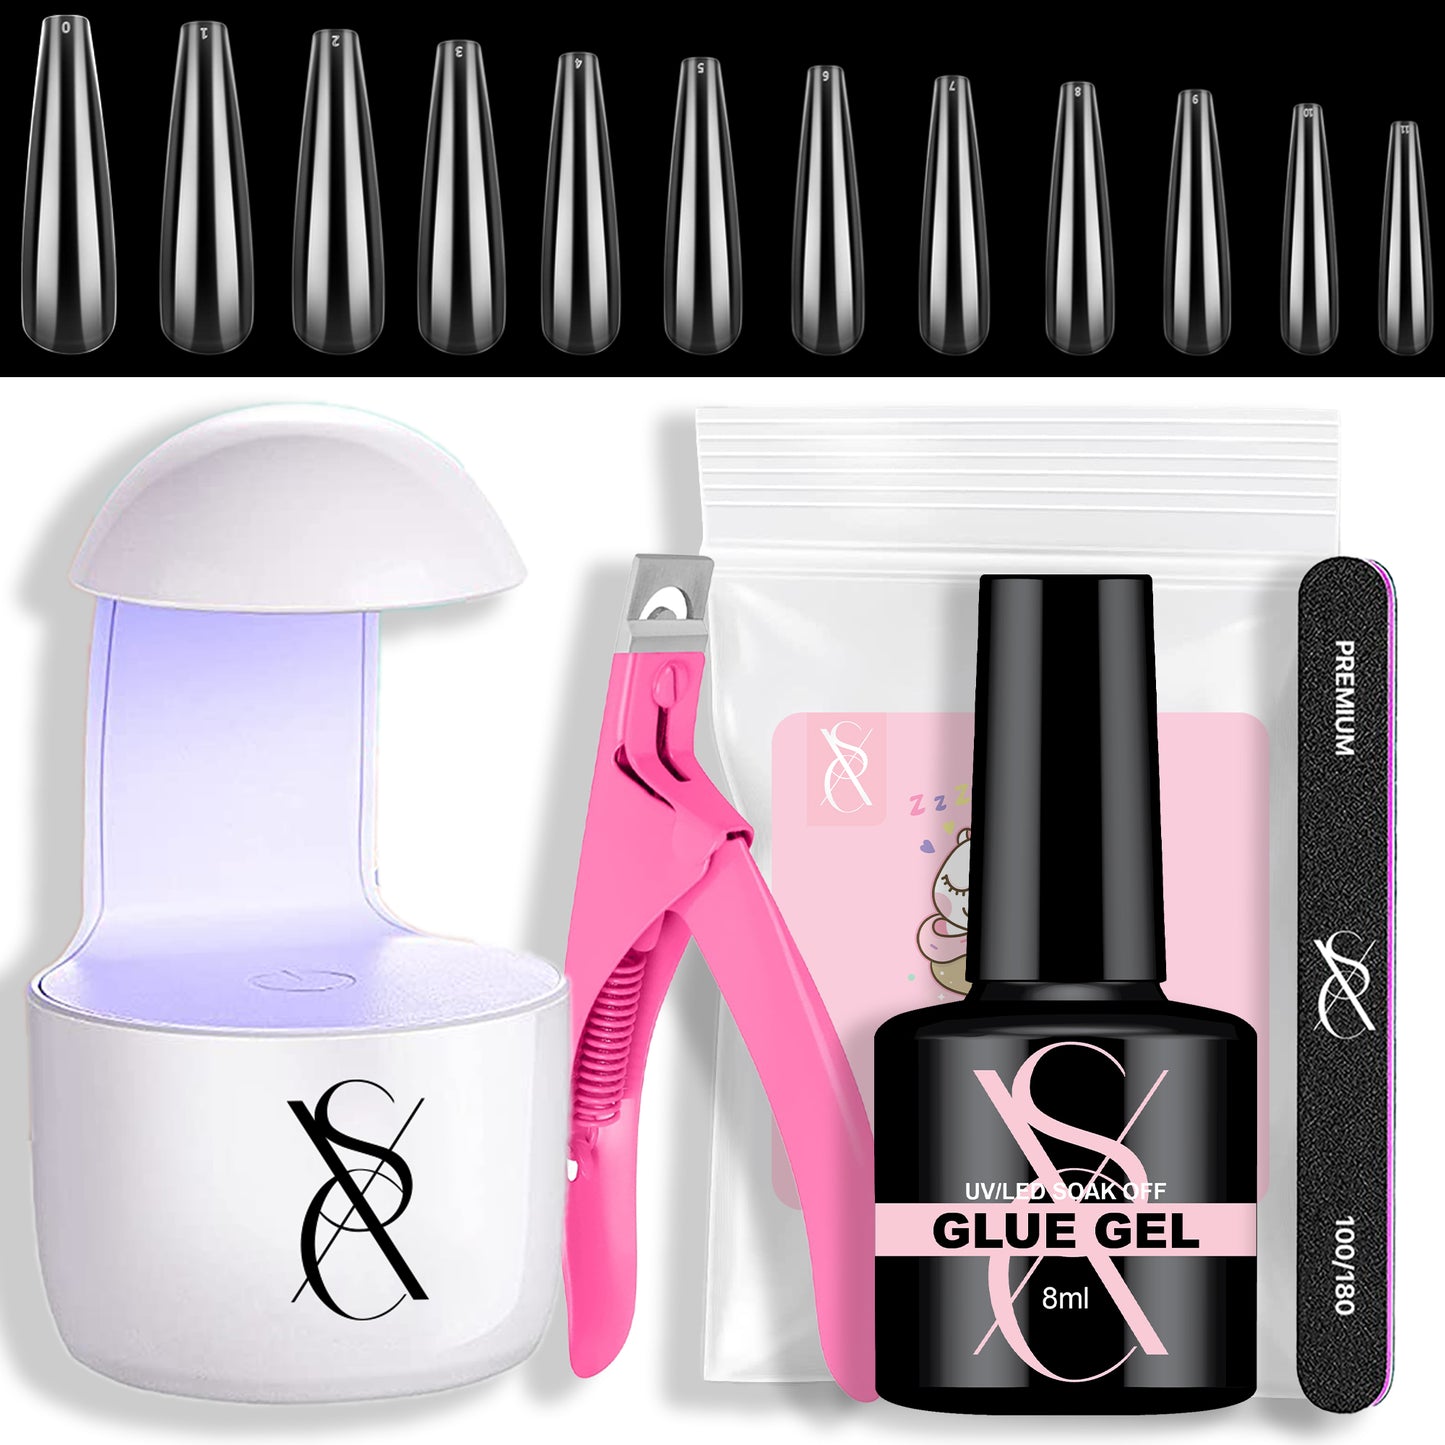 SXC Gel X Nail Kit with XXL Nail Tips and Glue Gel for beginners!